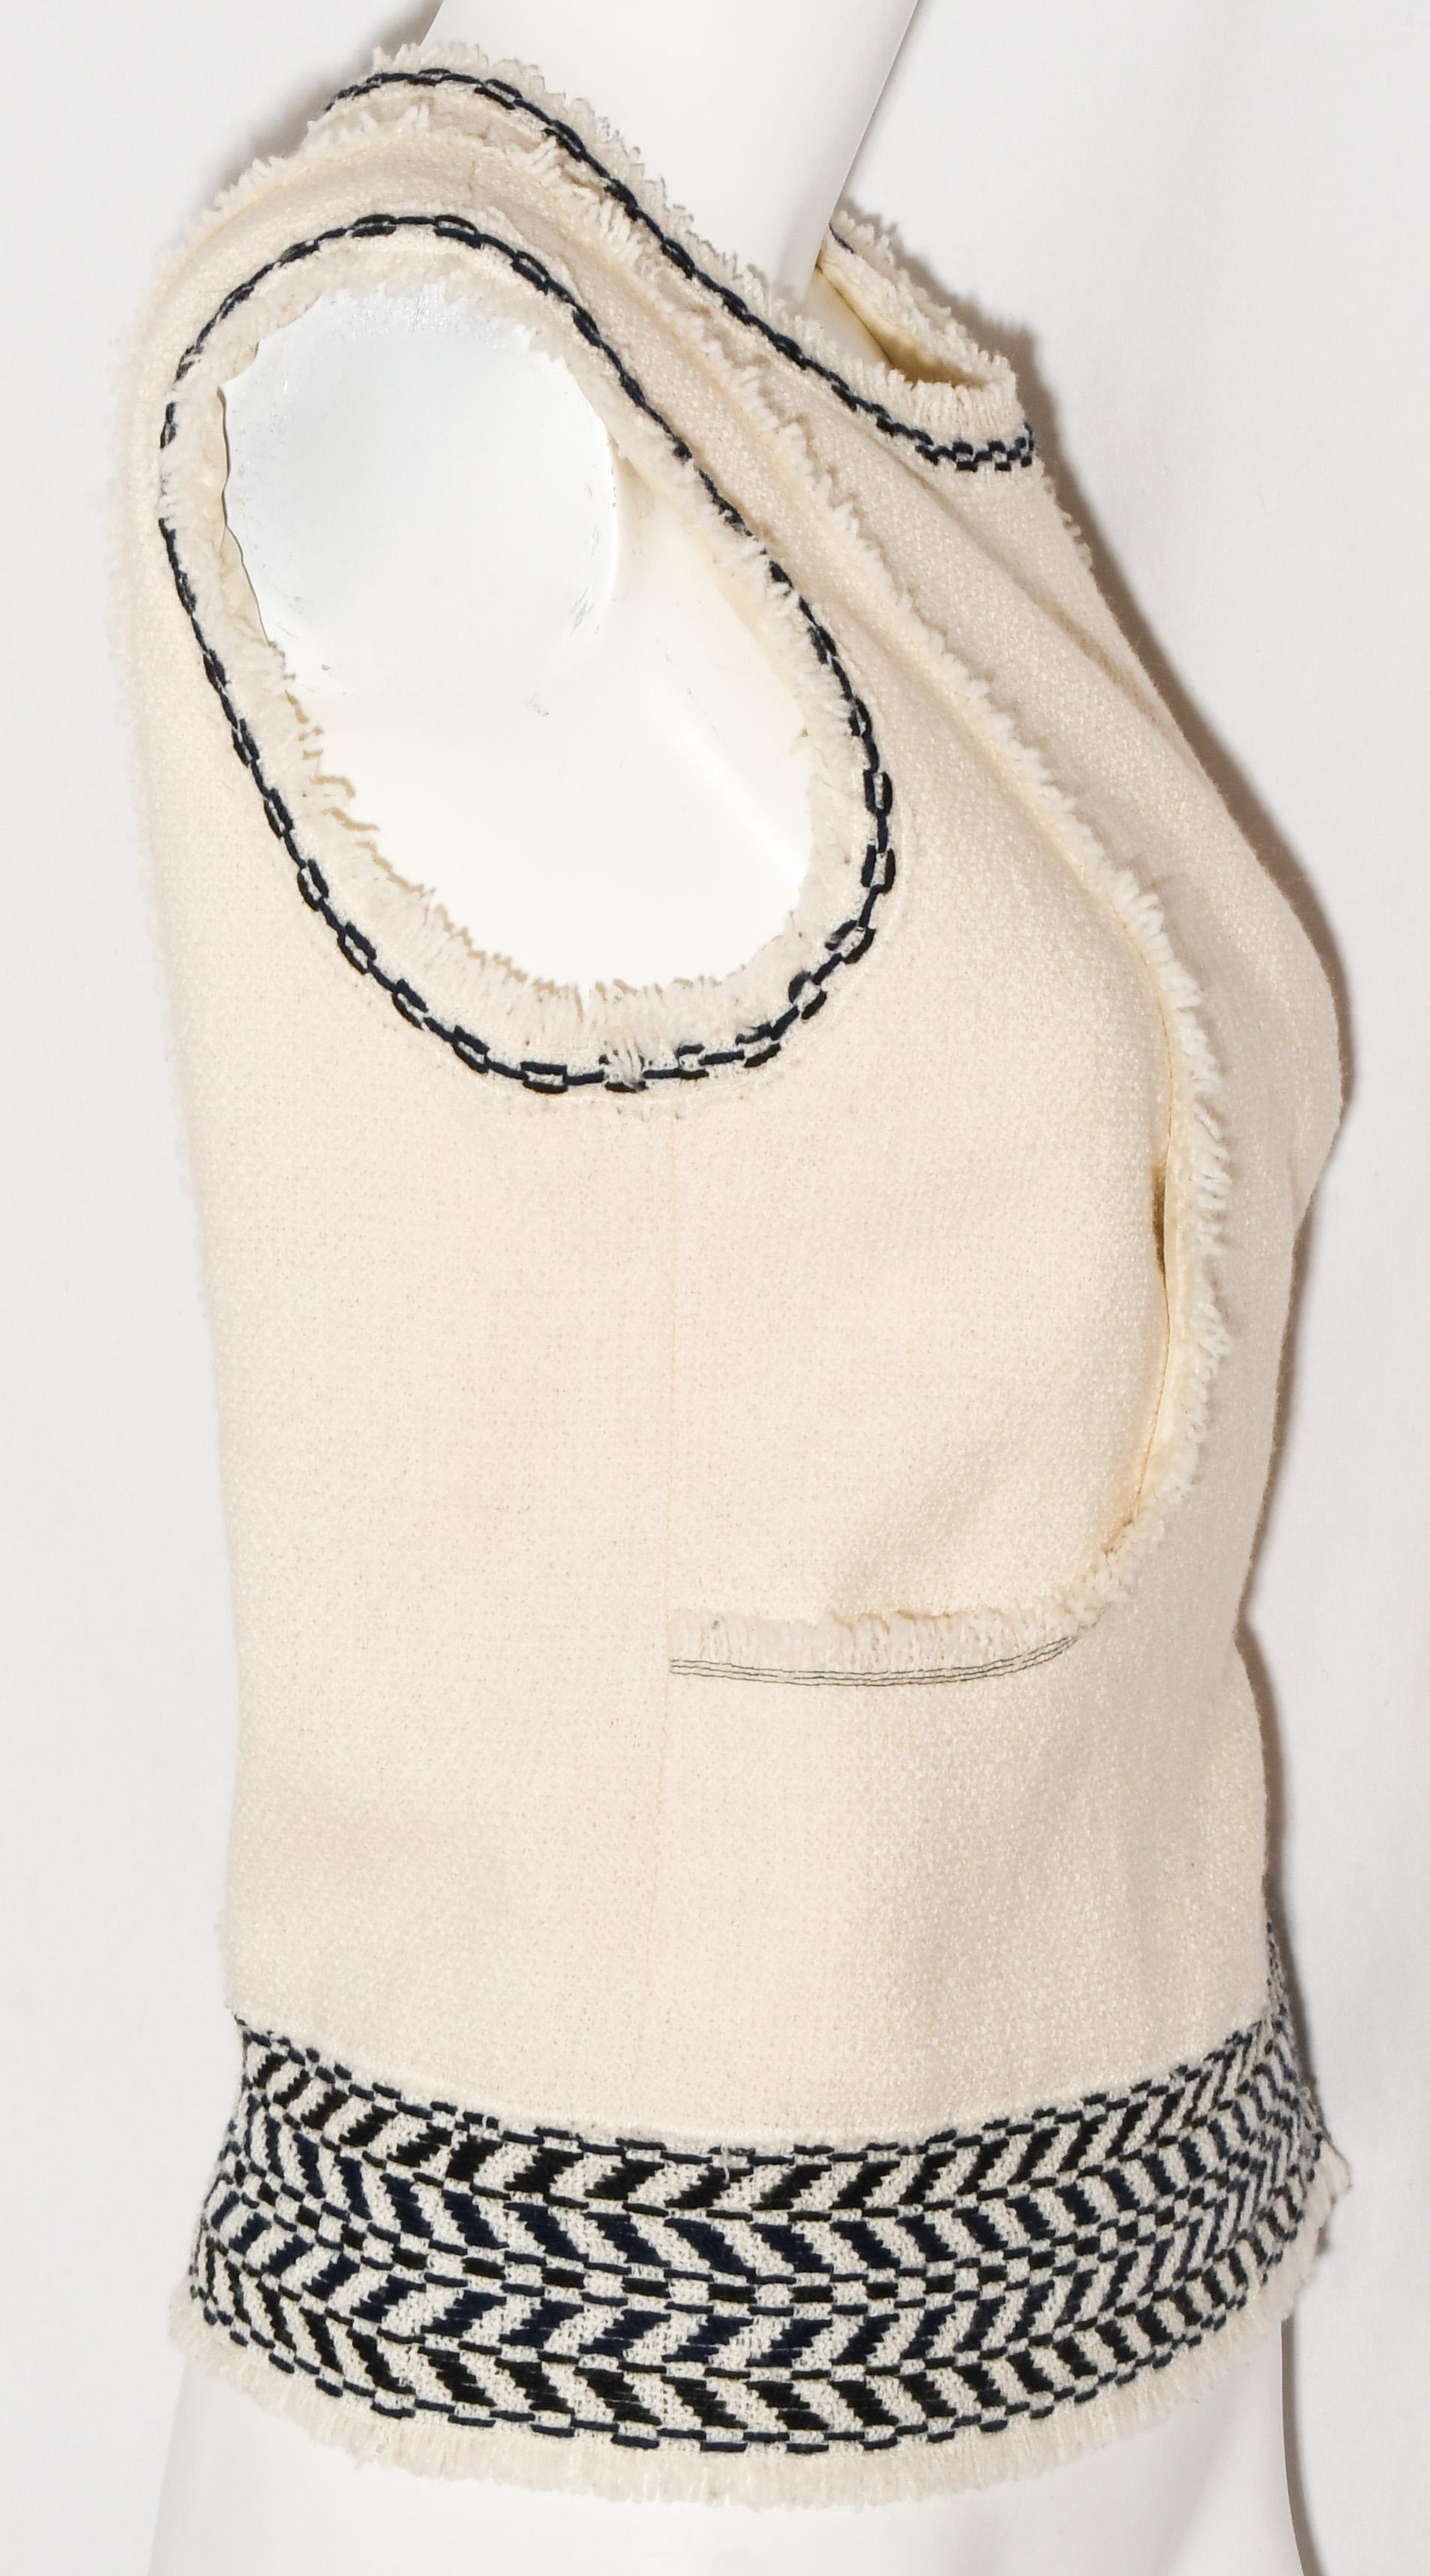 Chanel Ivory and Black Wool Fringed Sleeveless Top From 2004 Fall 46 In Excellent Condition For Sale In Palm Beach, FL